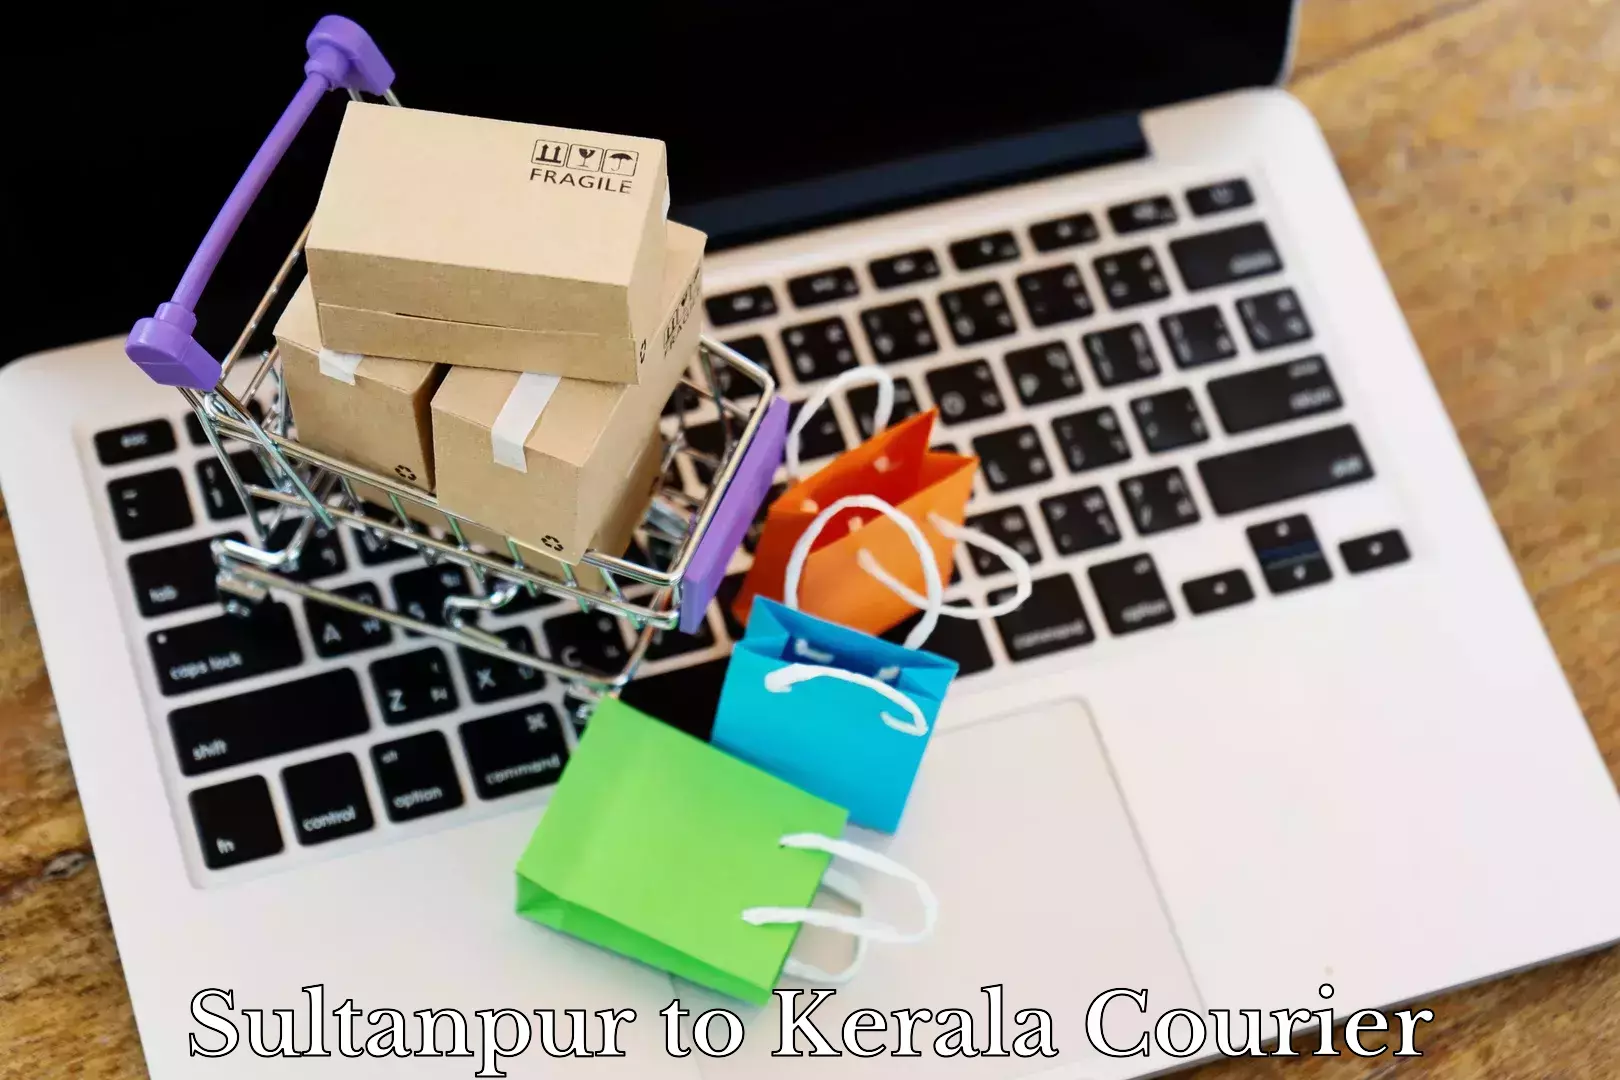 Baggage transport coordination Sultanpur to Kerala